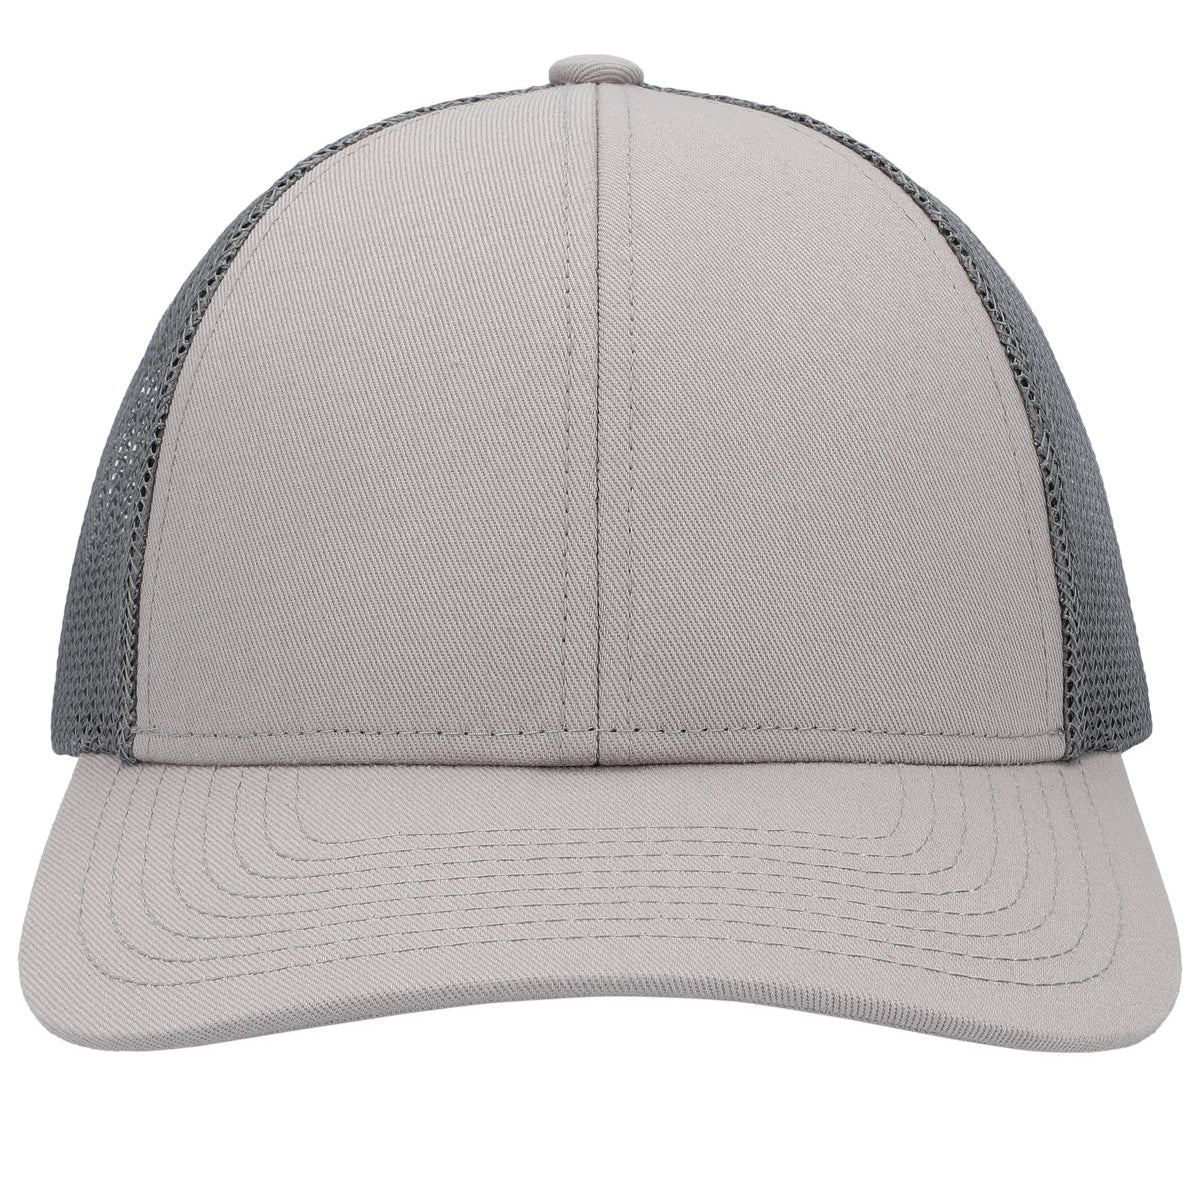 P114-PacificHeadwear-49-HGRY_LCH_HG-OS